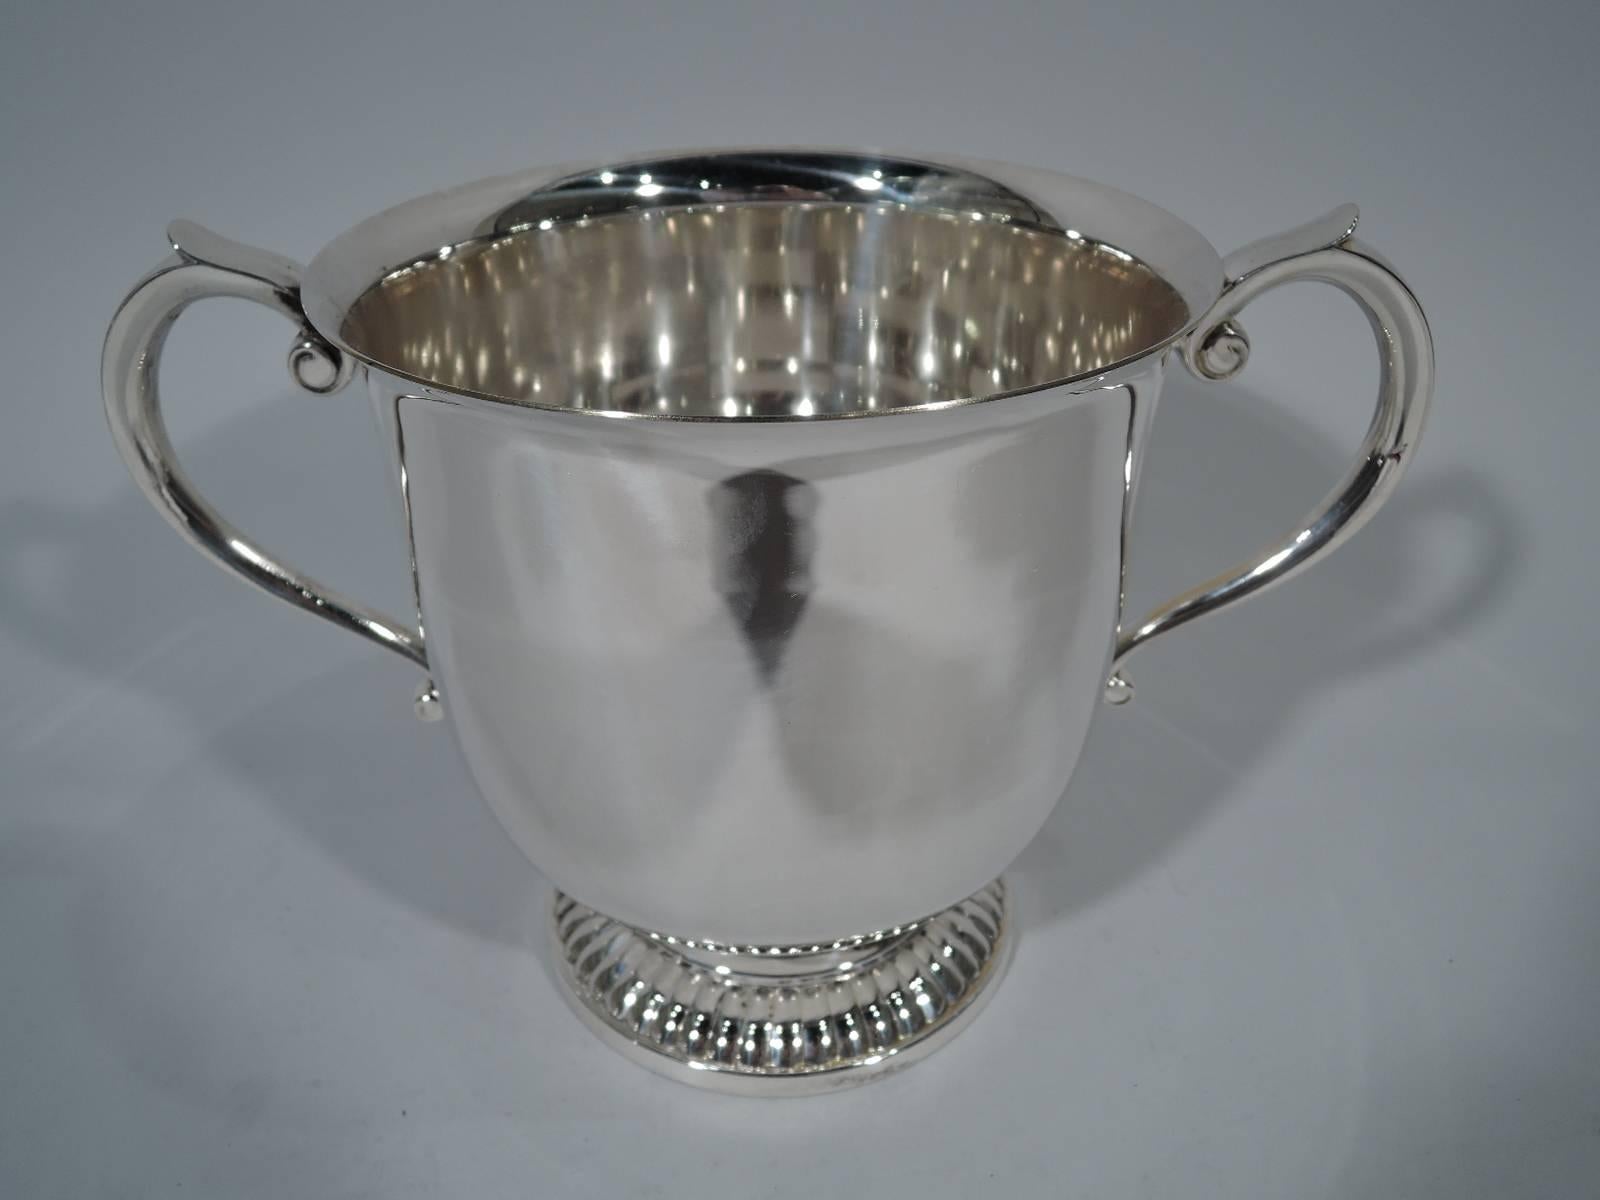 American sterling silver trophy cup. Urn with flared rim, capped scroll side handles and raised and gadrooned foot. Enough room for many years of winners’ names. Hallmarked Kirk Stieff. The two Baltimore silver makers merged in 1979 to form one